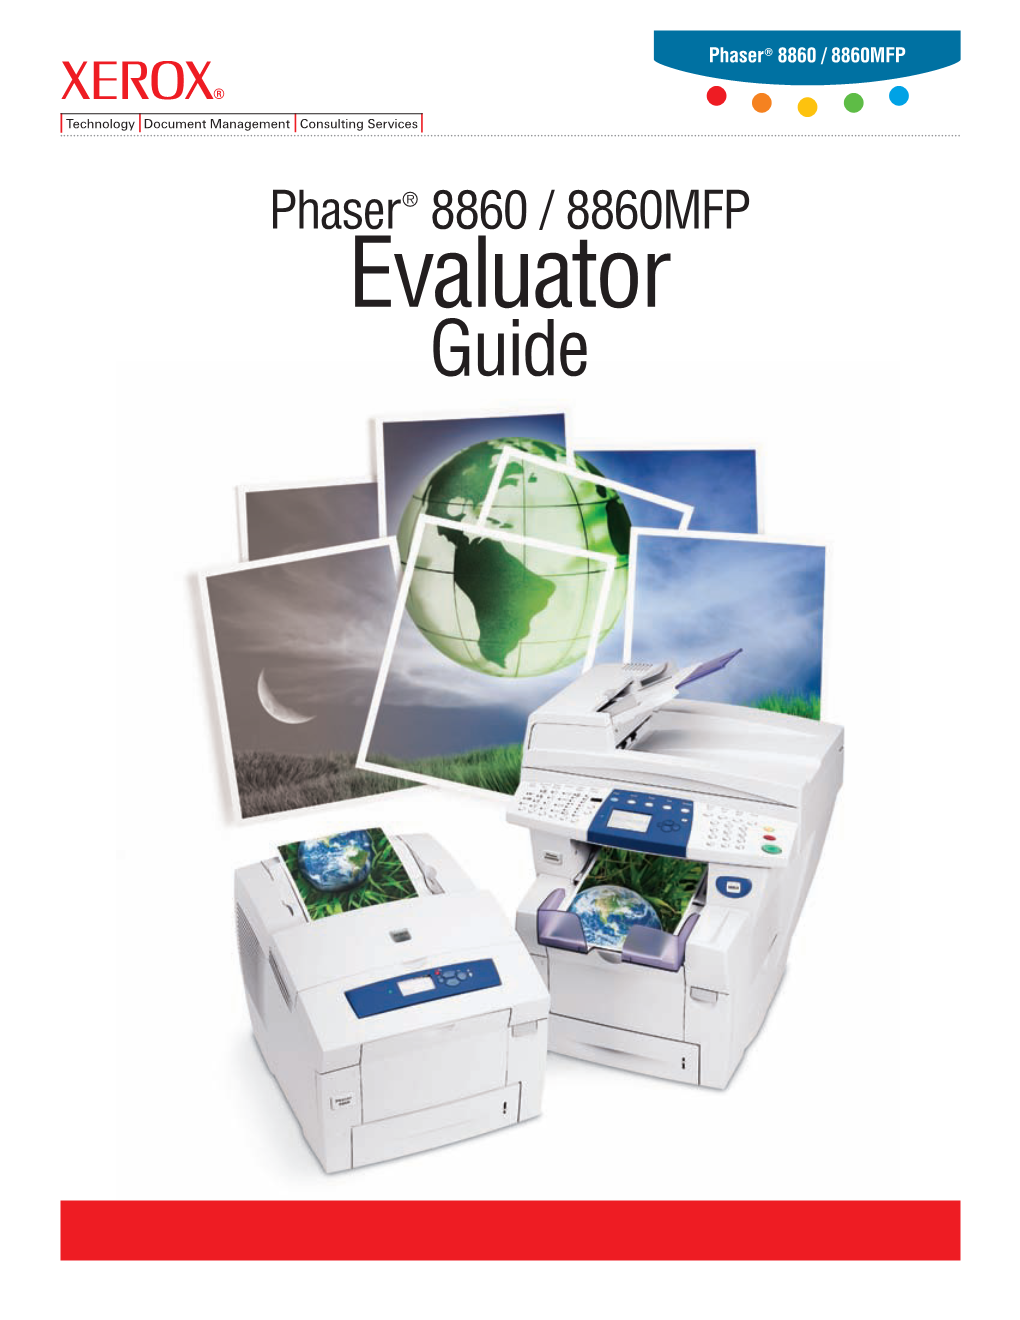 Xerox Phaser 8860/8860MFP Evaluator Guide